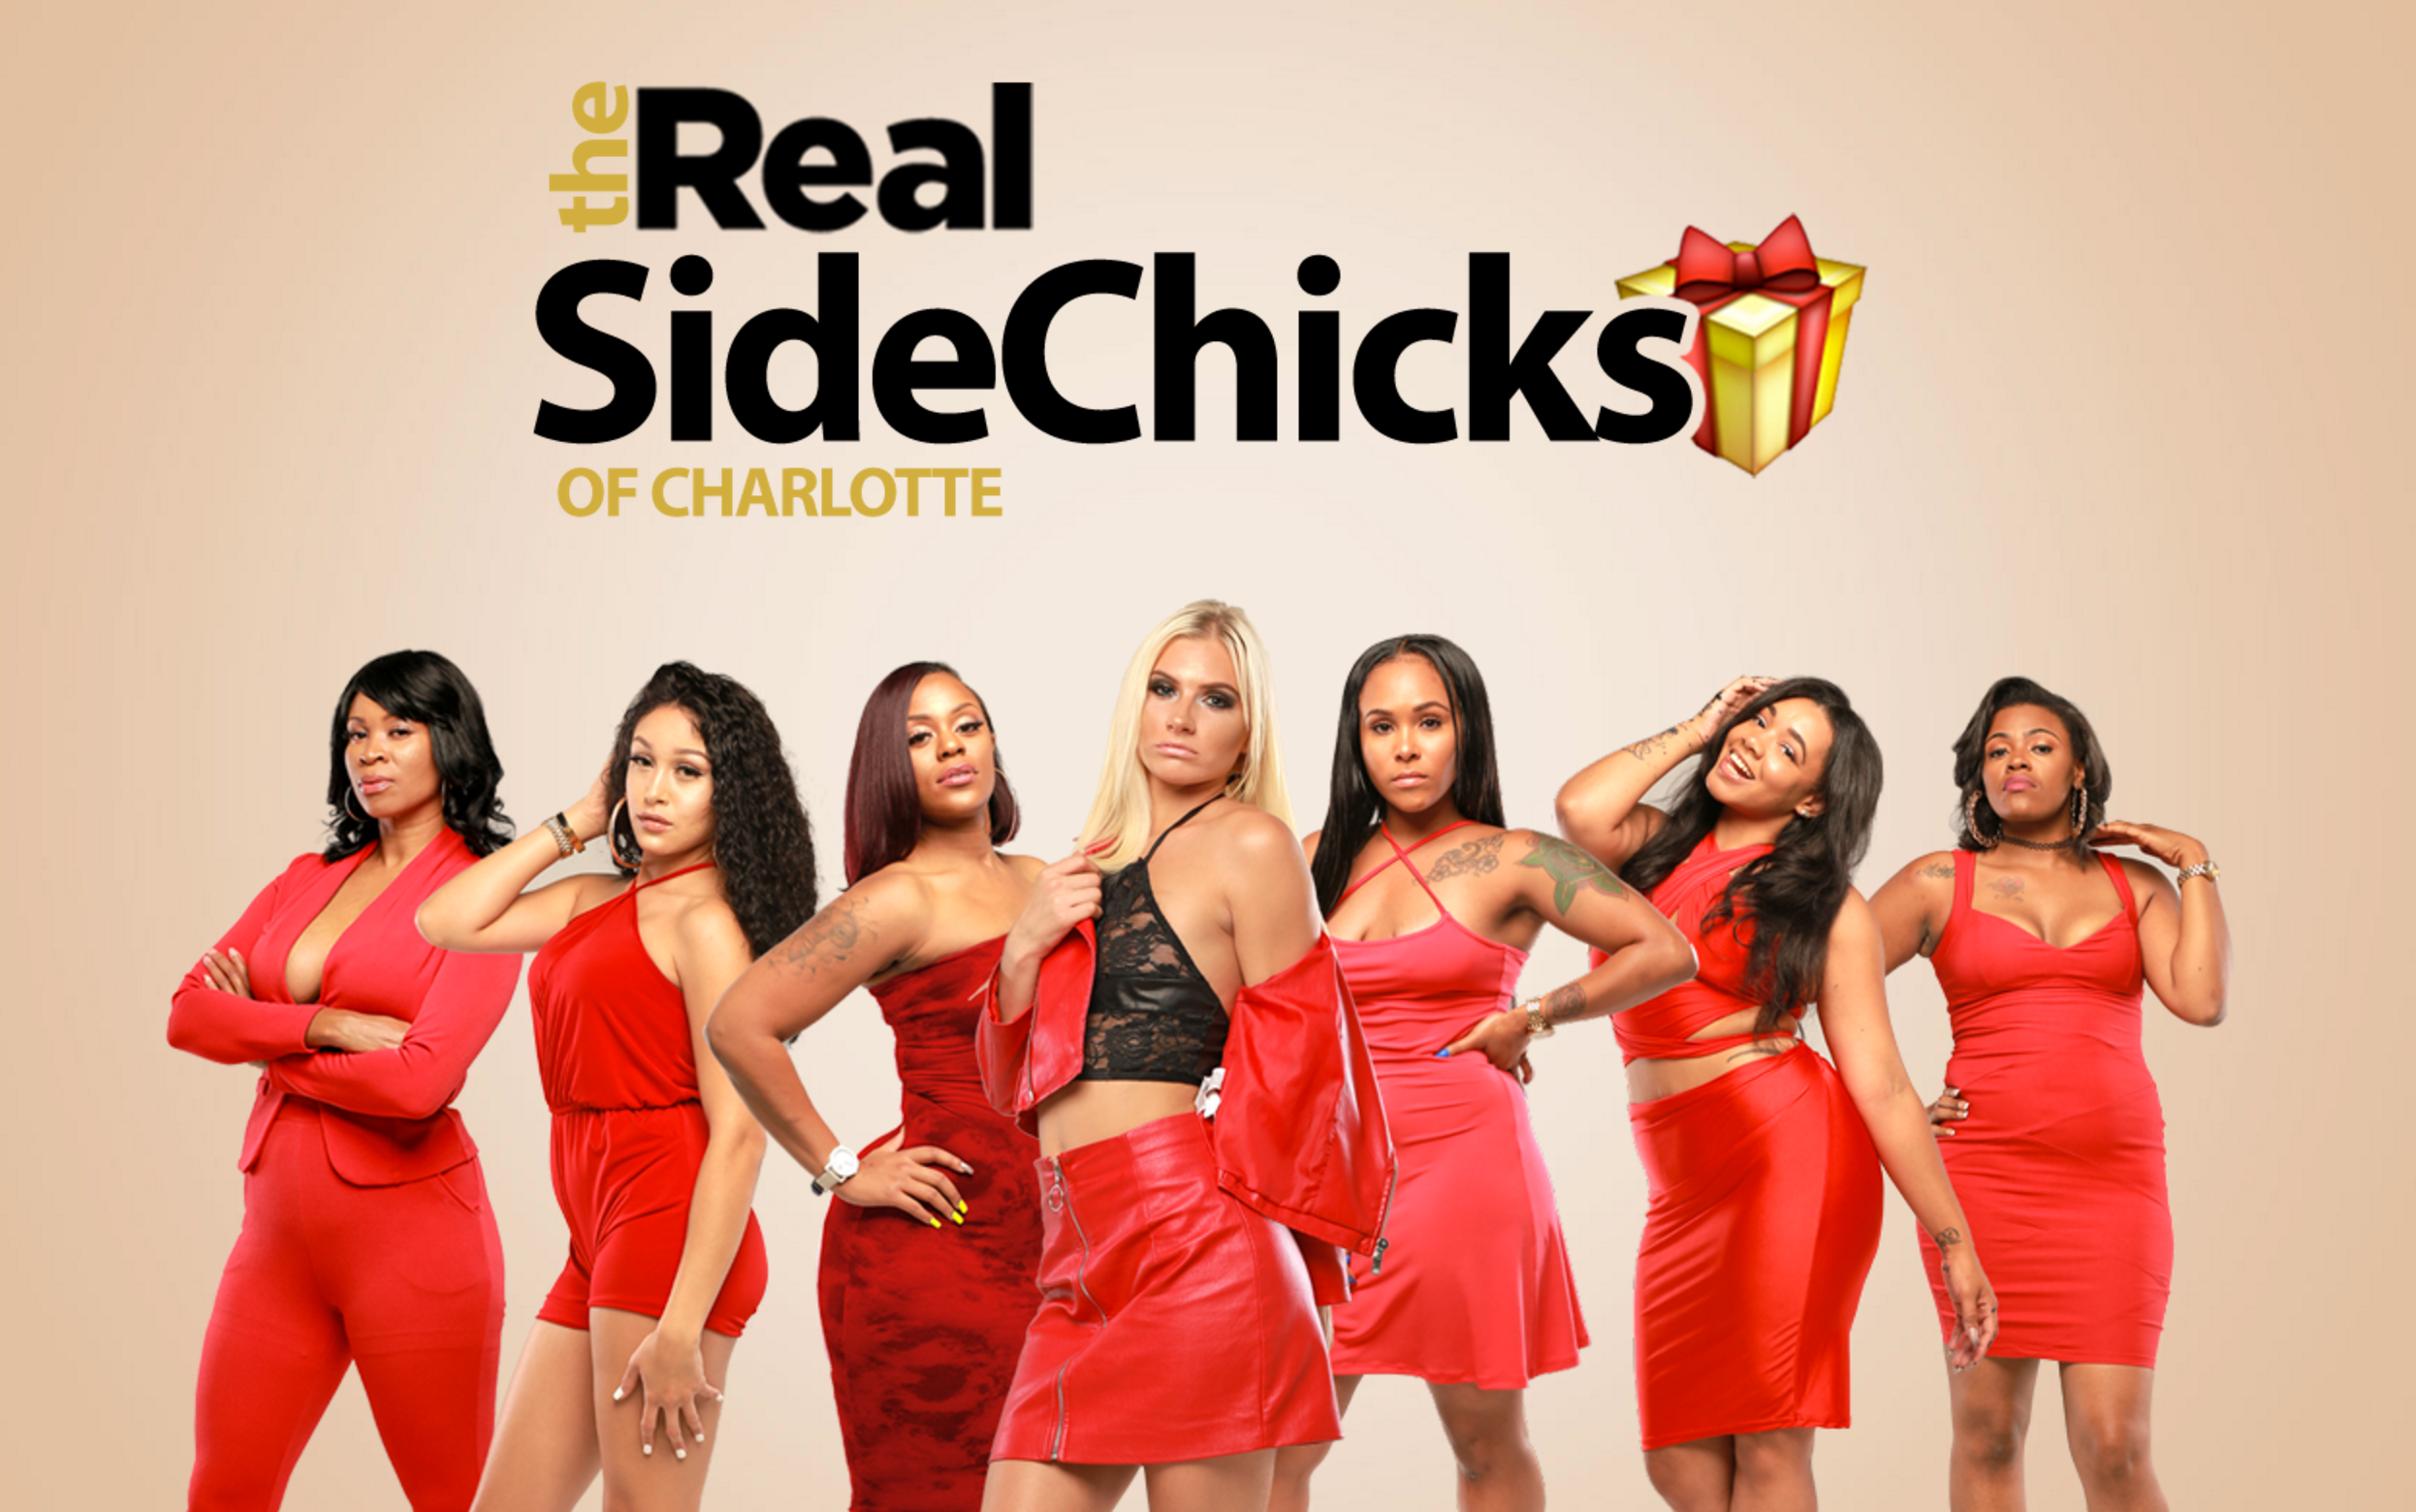 Is ‘The Real Sidechicks Of Charlotte’ A Guilty Pleasure You Would Watch?